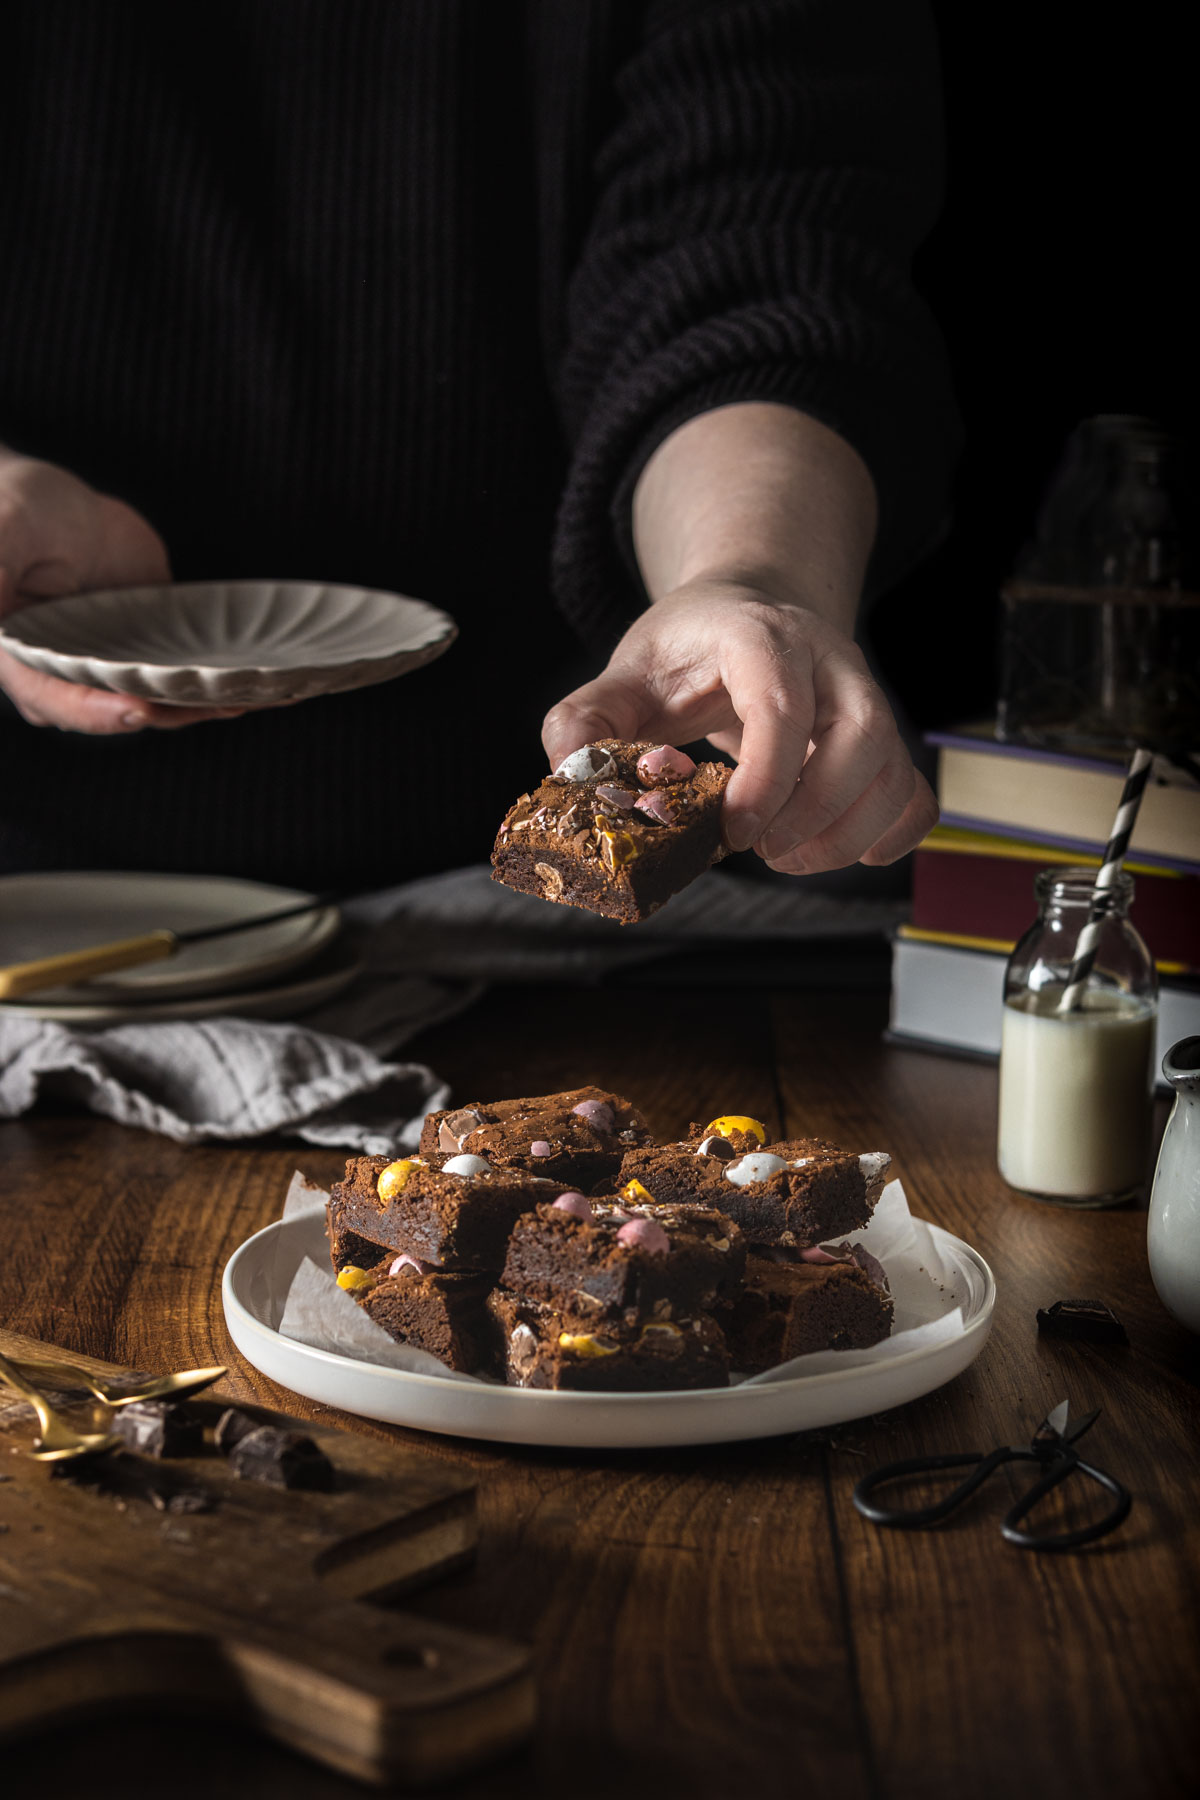 A person picking up a slice of Mini Egg brownies from a serving plate with lots of brownie slices